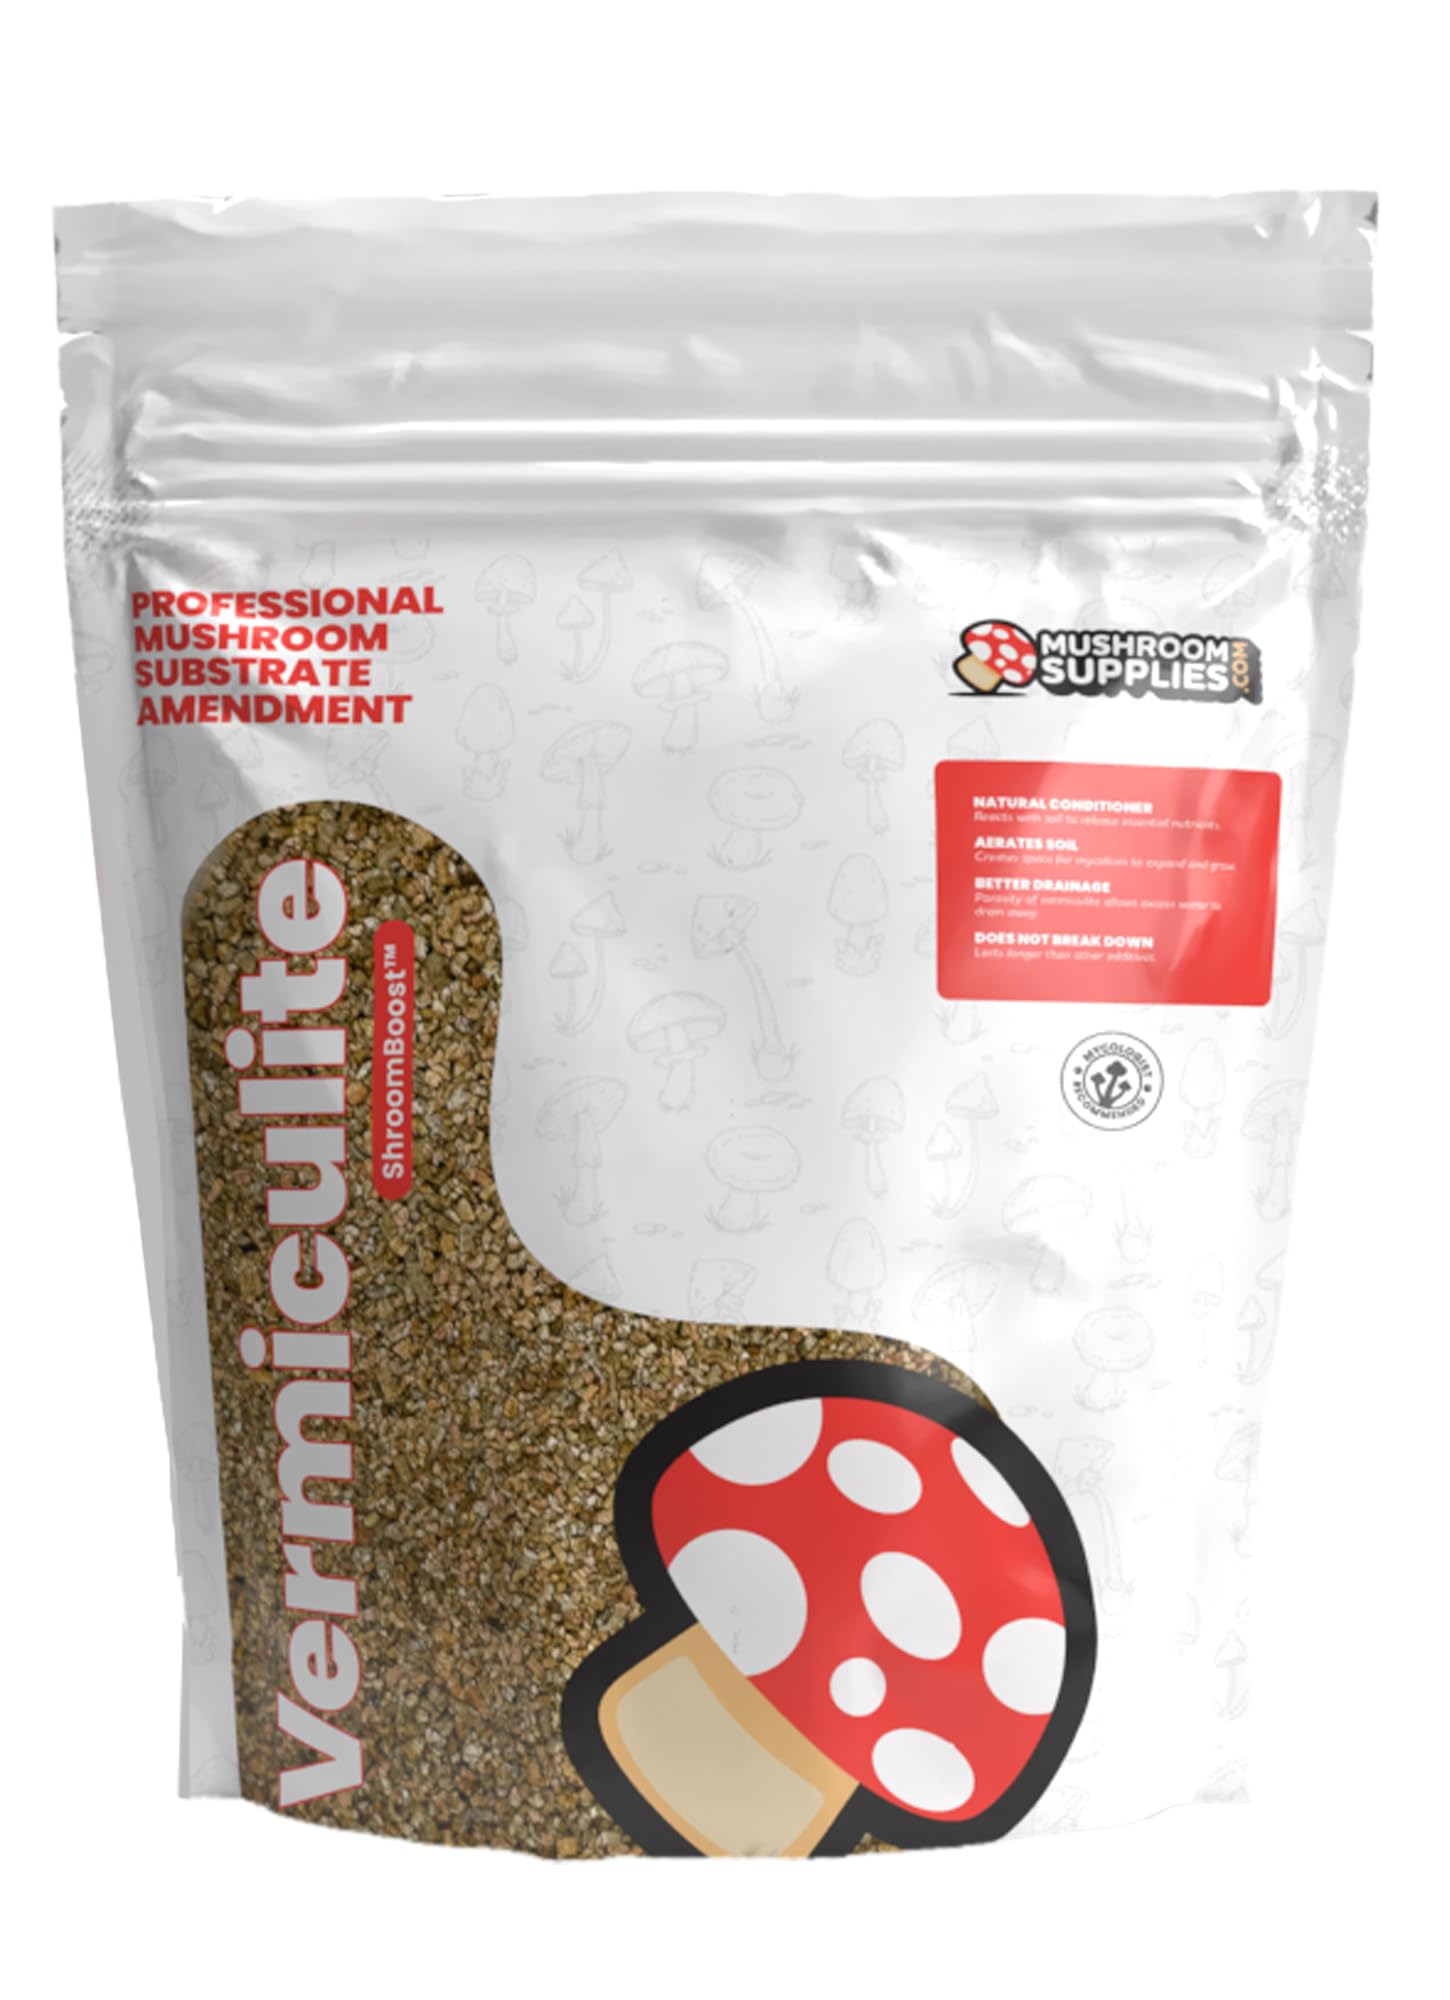 MushroomSupplies.com Organic Vermiculite (8QT) | Substrate Conditioner for Mushroom Growing | Mycologist Recommended